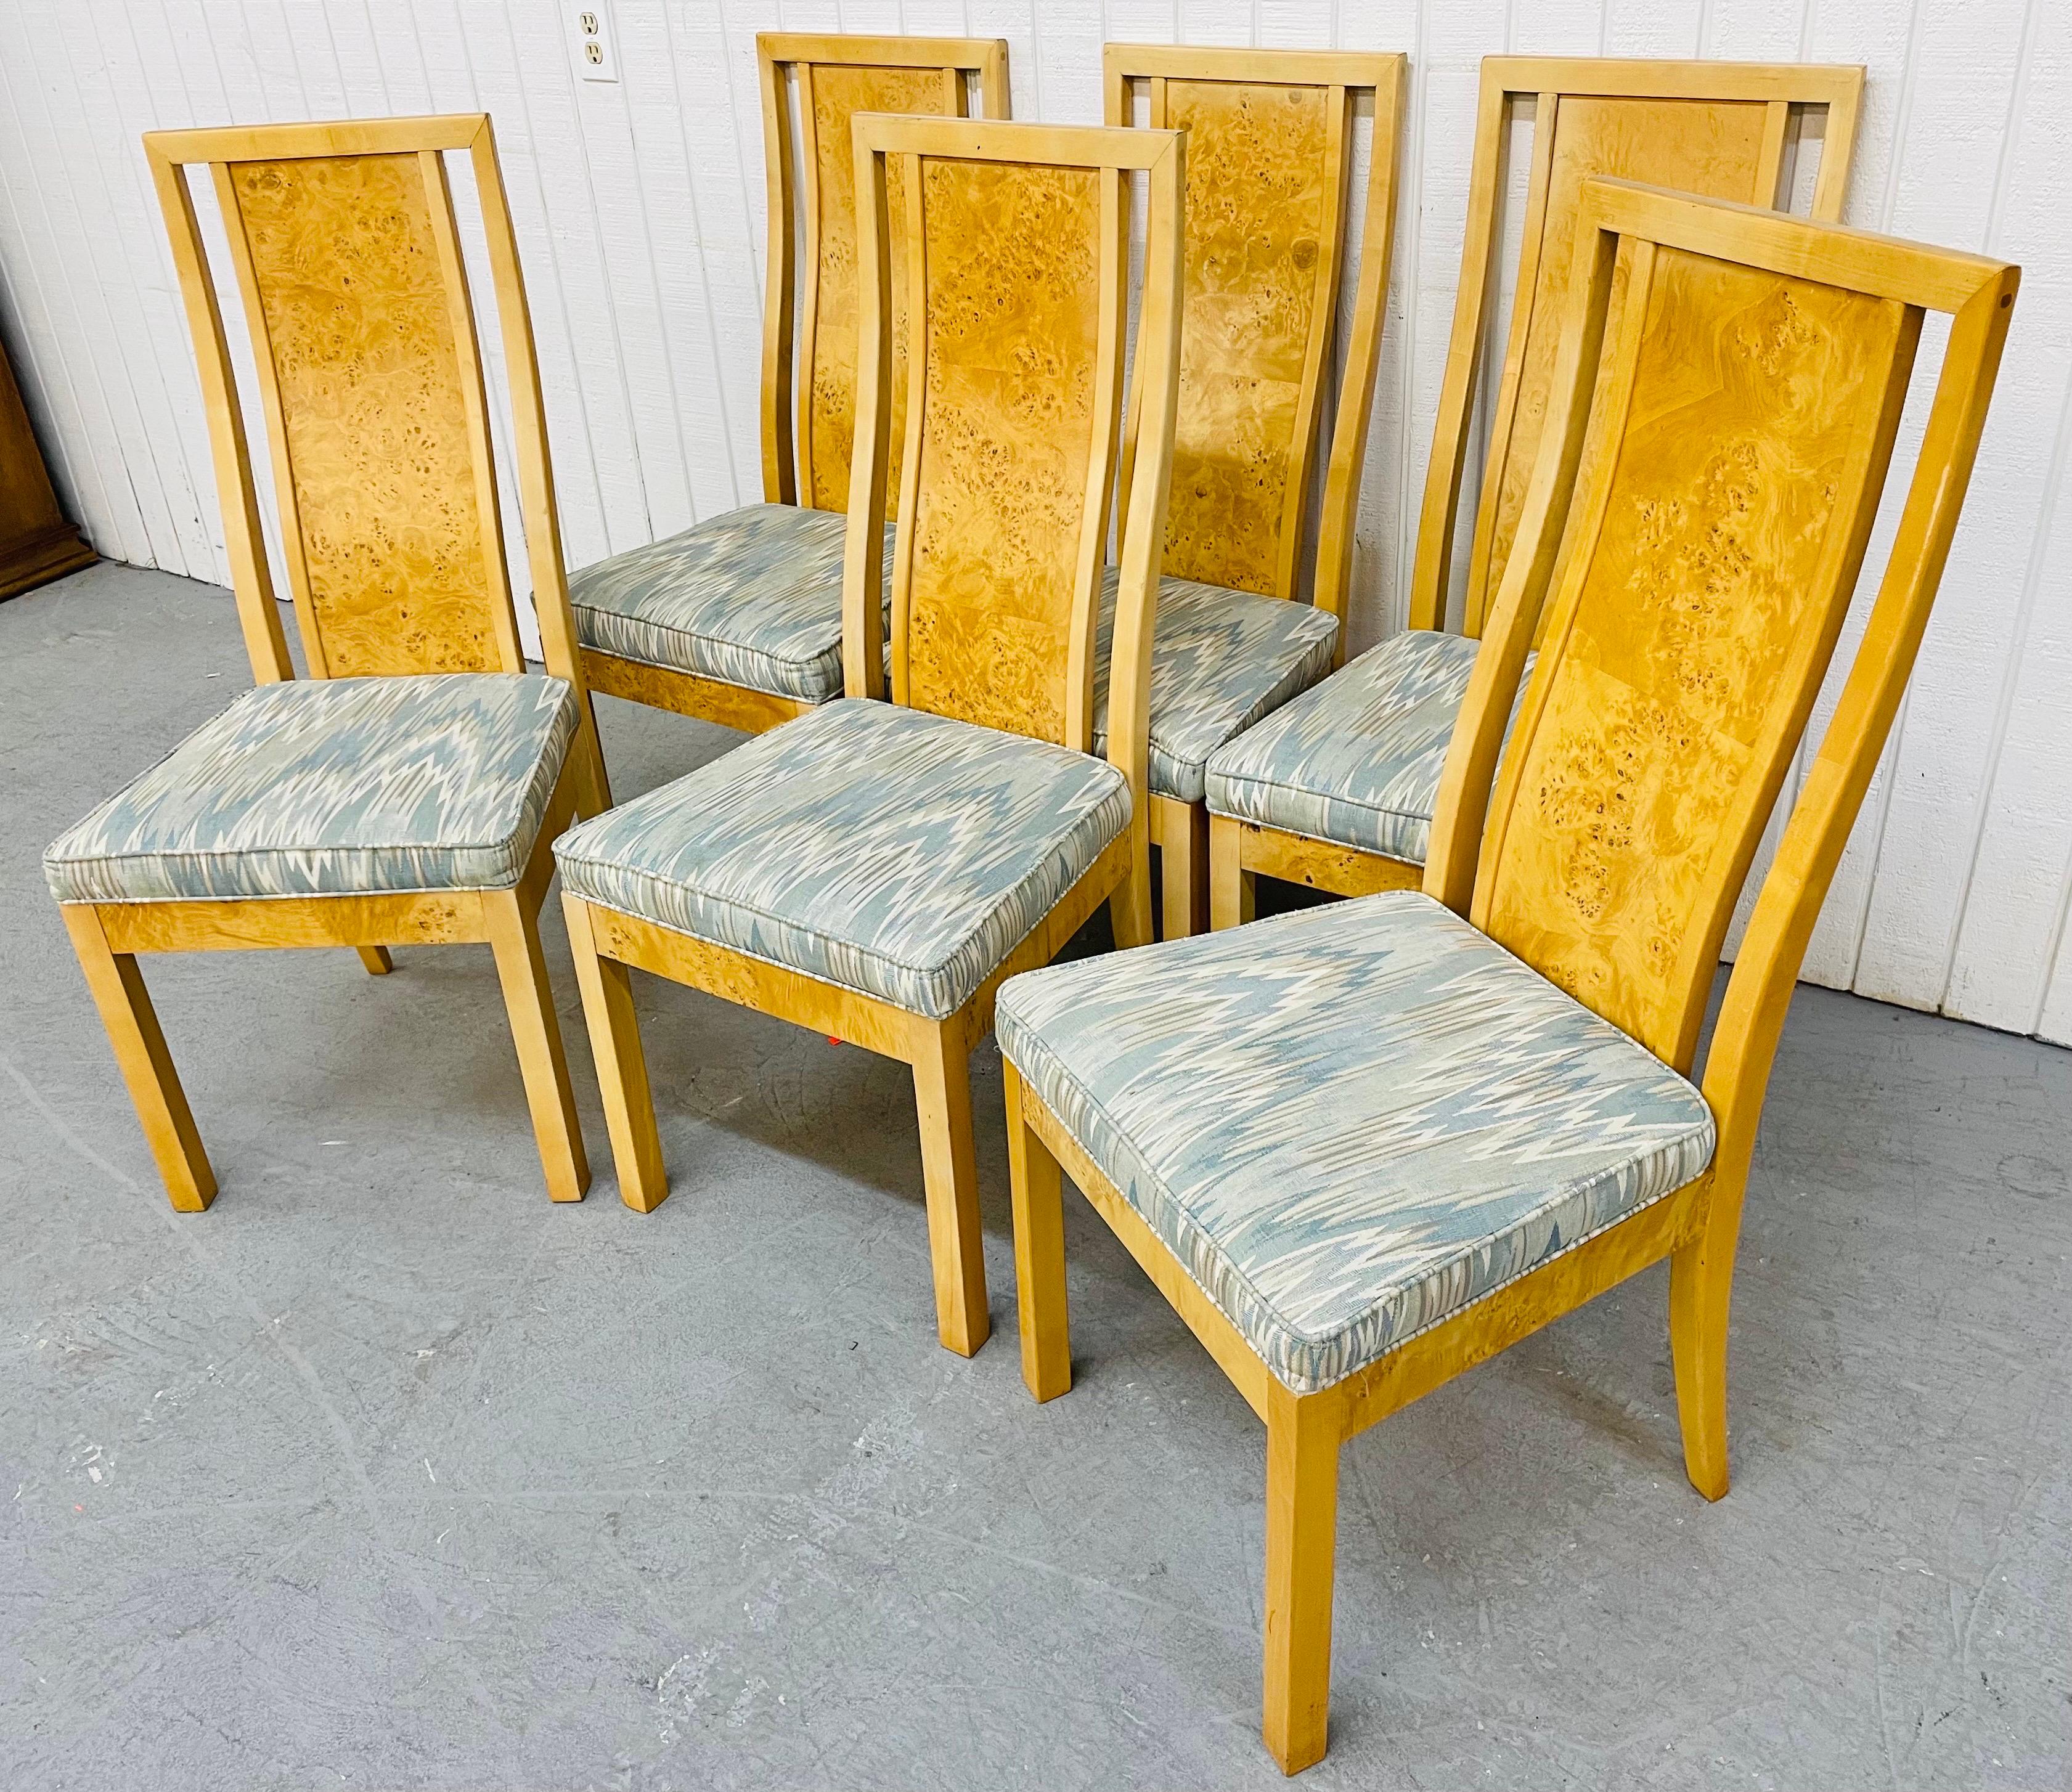 This listing is for a set of six vintage Milo Baughman Style Burled Wood dining chairs. Featuring six straight chairs, original upholstery, and a beautiful burled wood back rest.